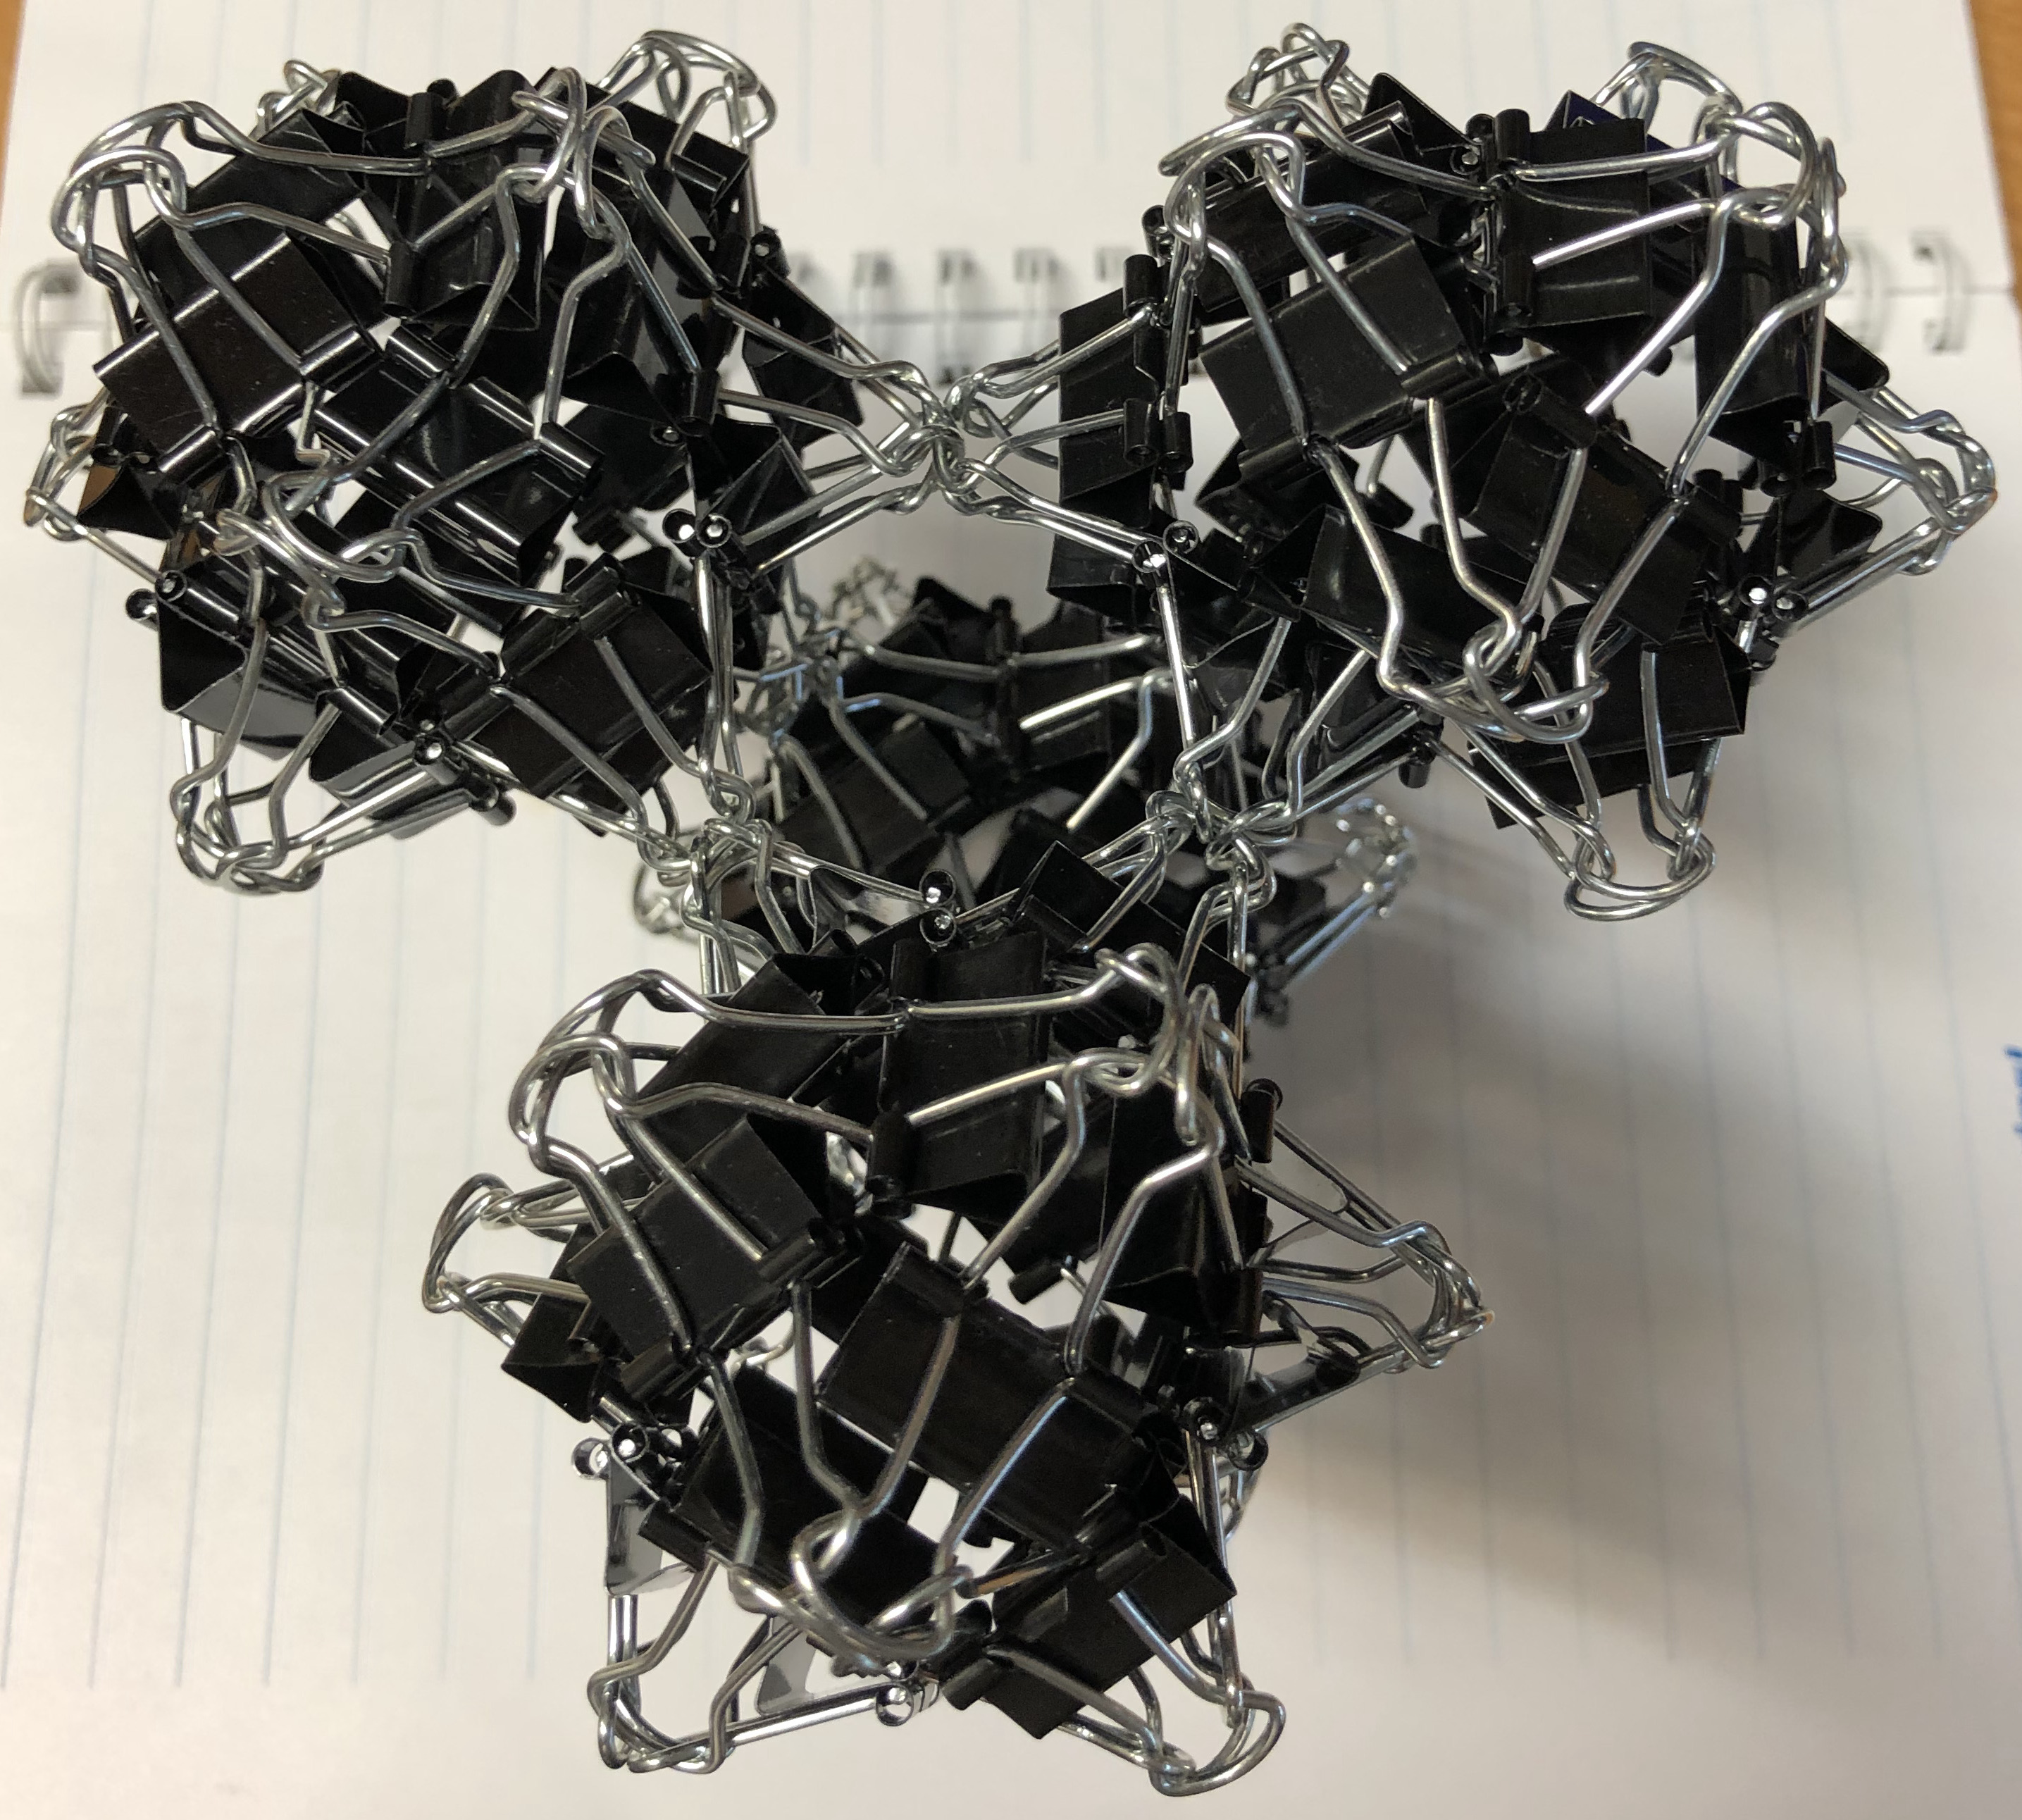 24 clips forming spiky cuboctahedron, 4 of that forming tetrahedron